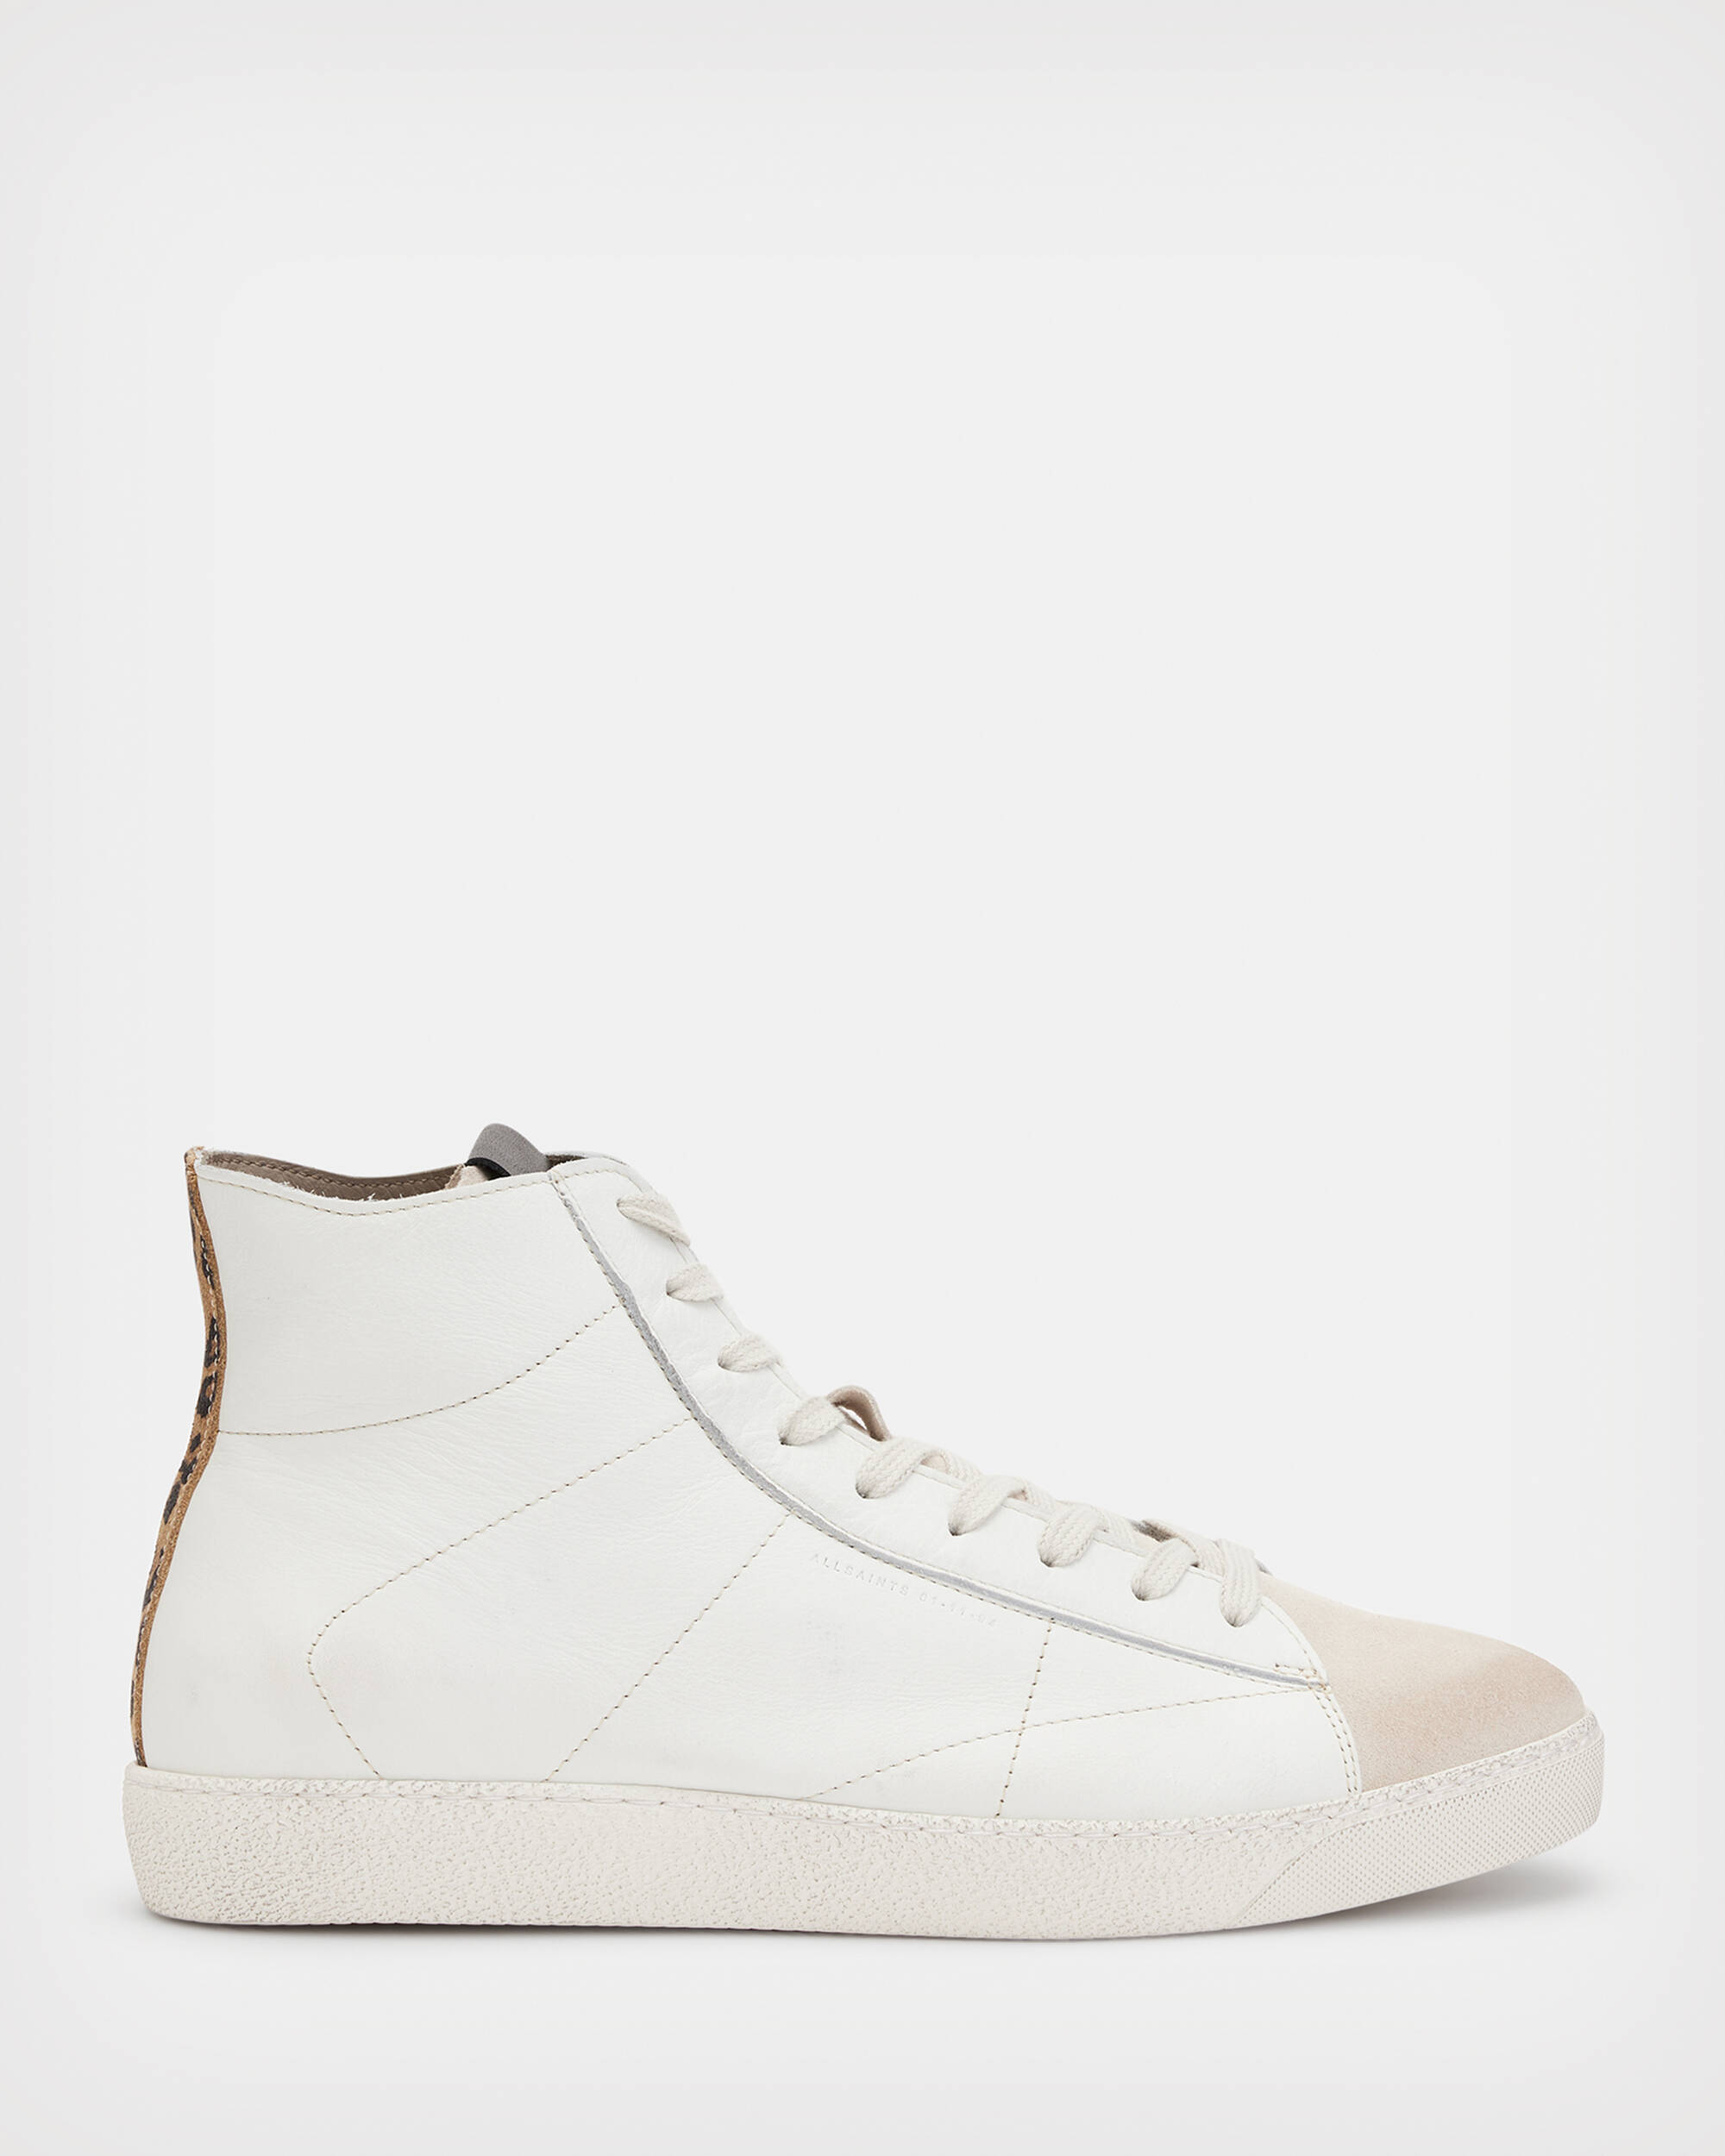 Tundy High Top Sneakers WHITE LEOPARD | ALLSAINTS US